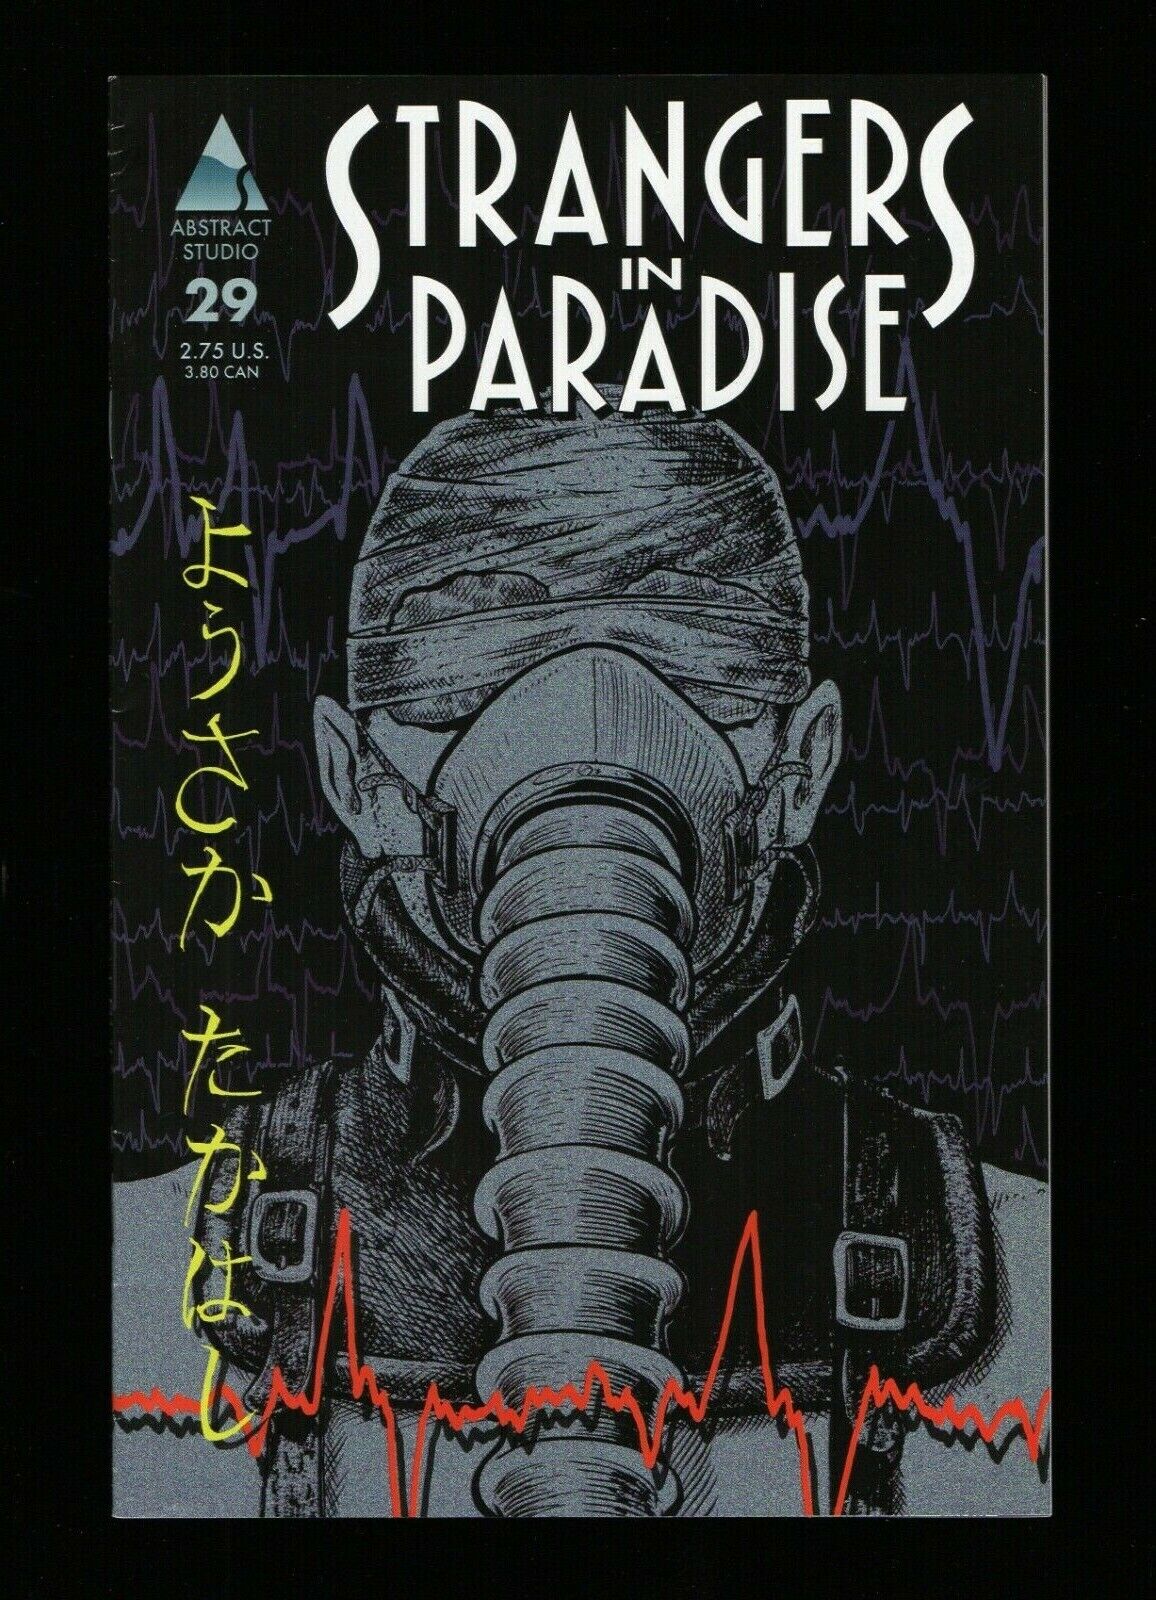 Strangers In Paradise #29 (2000) Abstract Studios - Image Comics